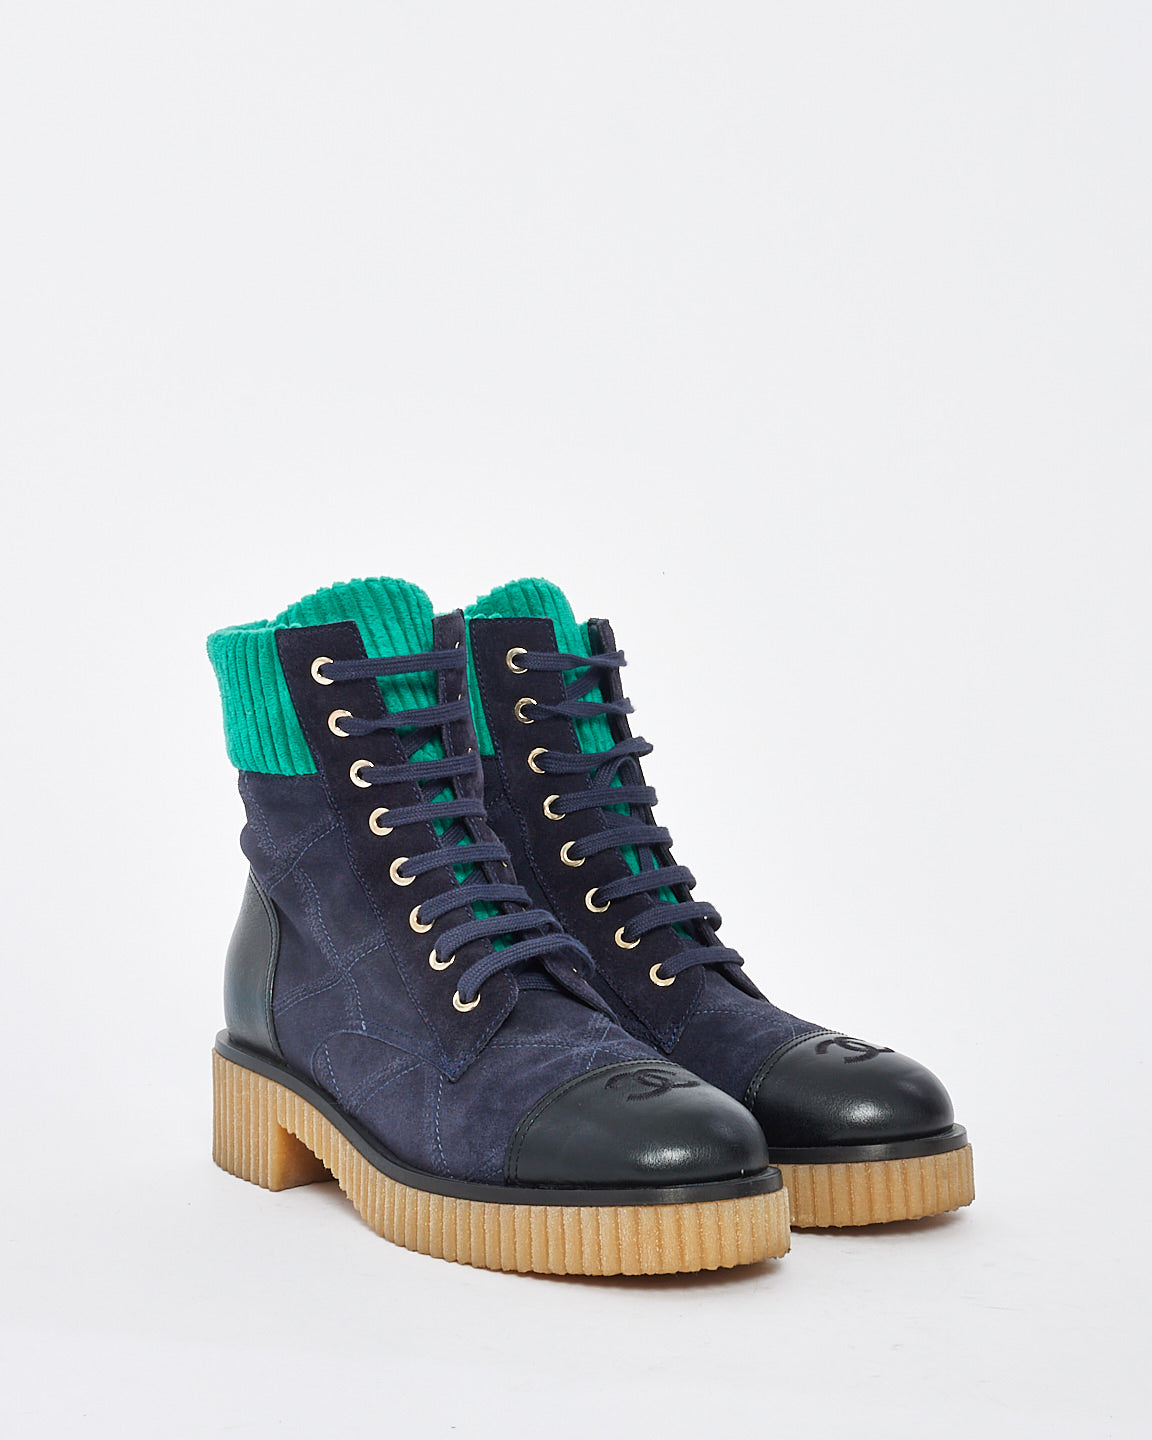 Chanel Navy/Turquoise Suede & Corduroy Combat Boots - 38